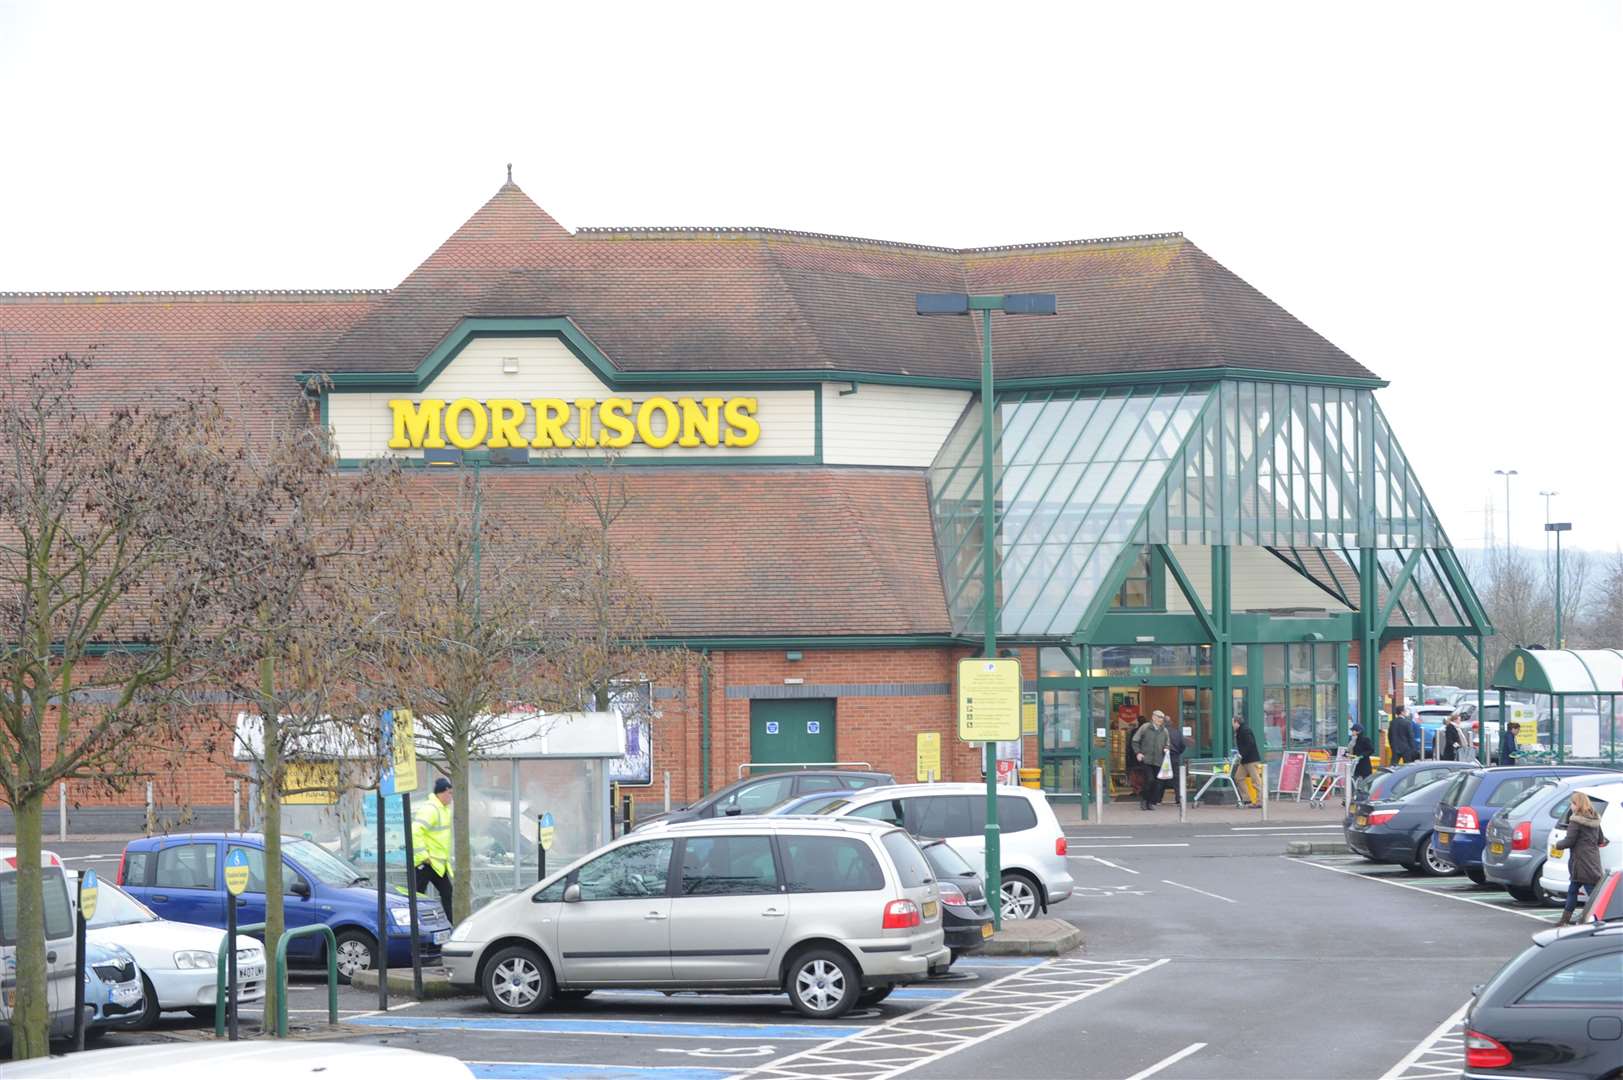 Morrisons in Coldharbour Road, Northfleet, is offering a three-course Christmas dinner for £7.50